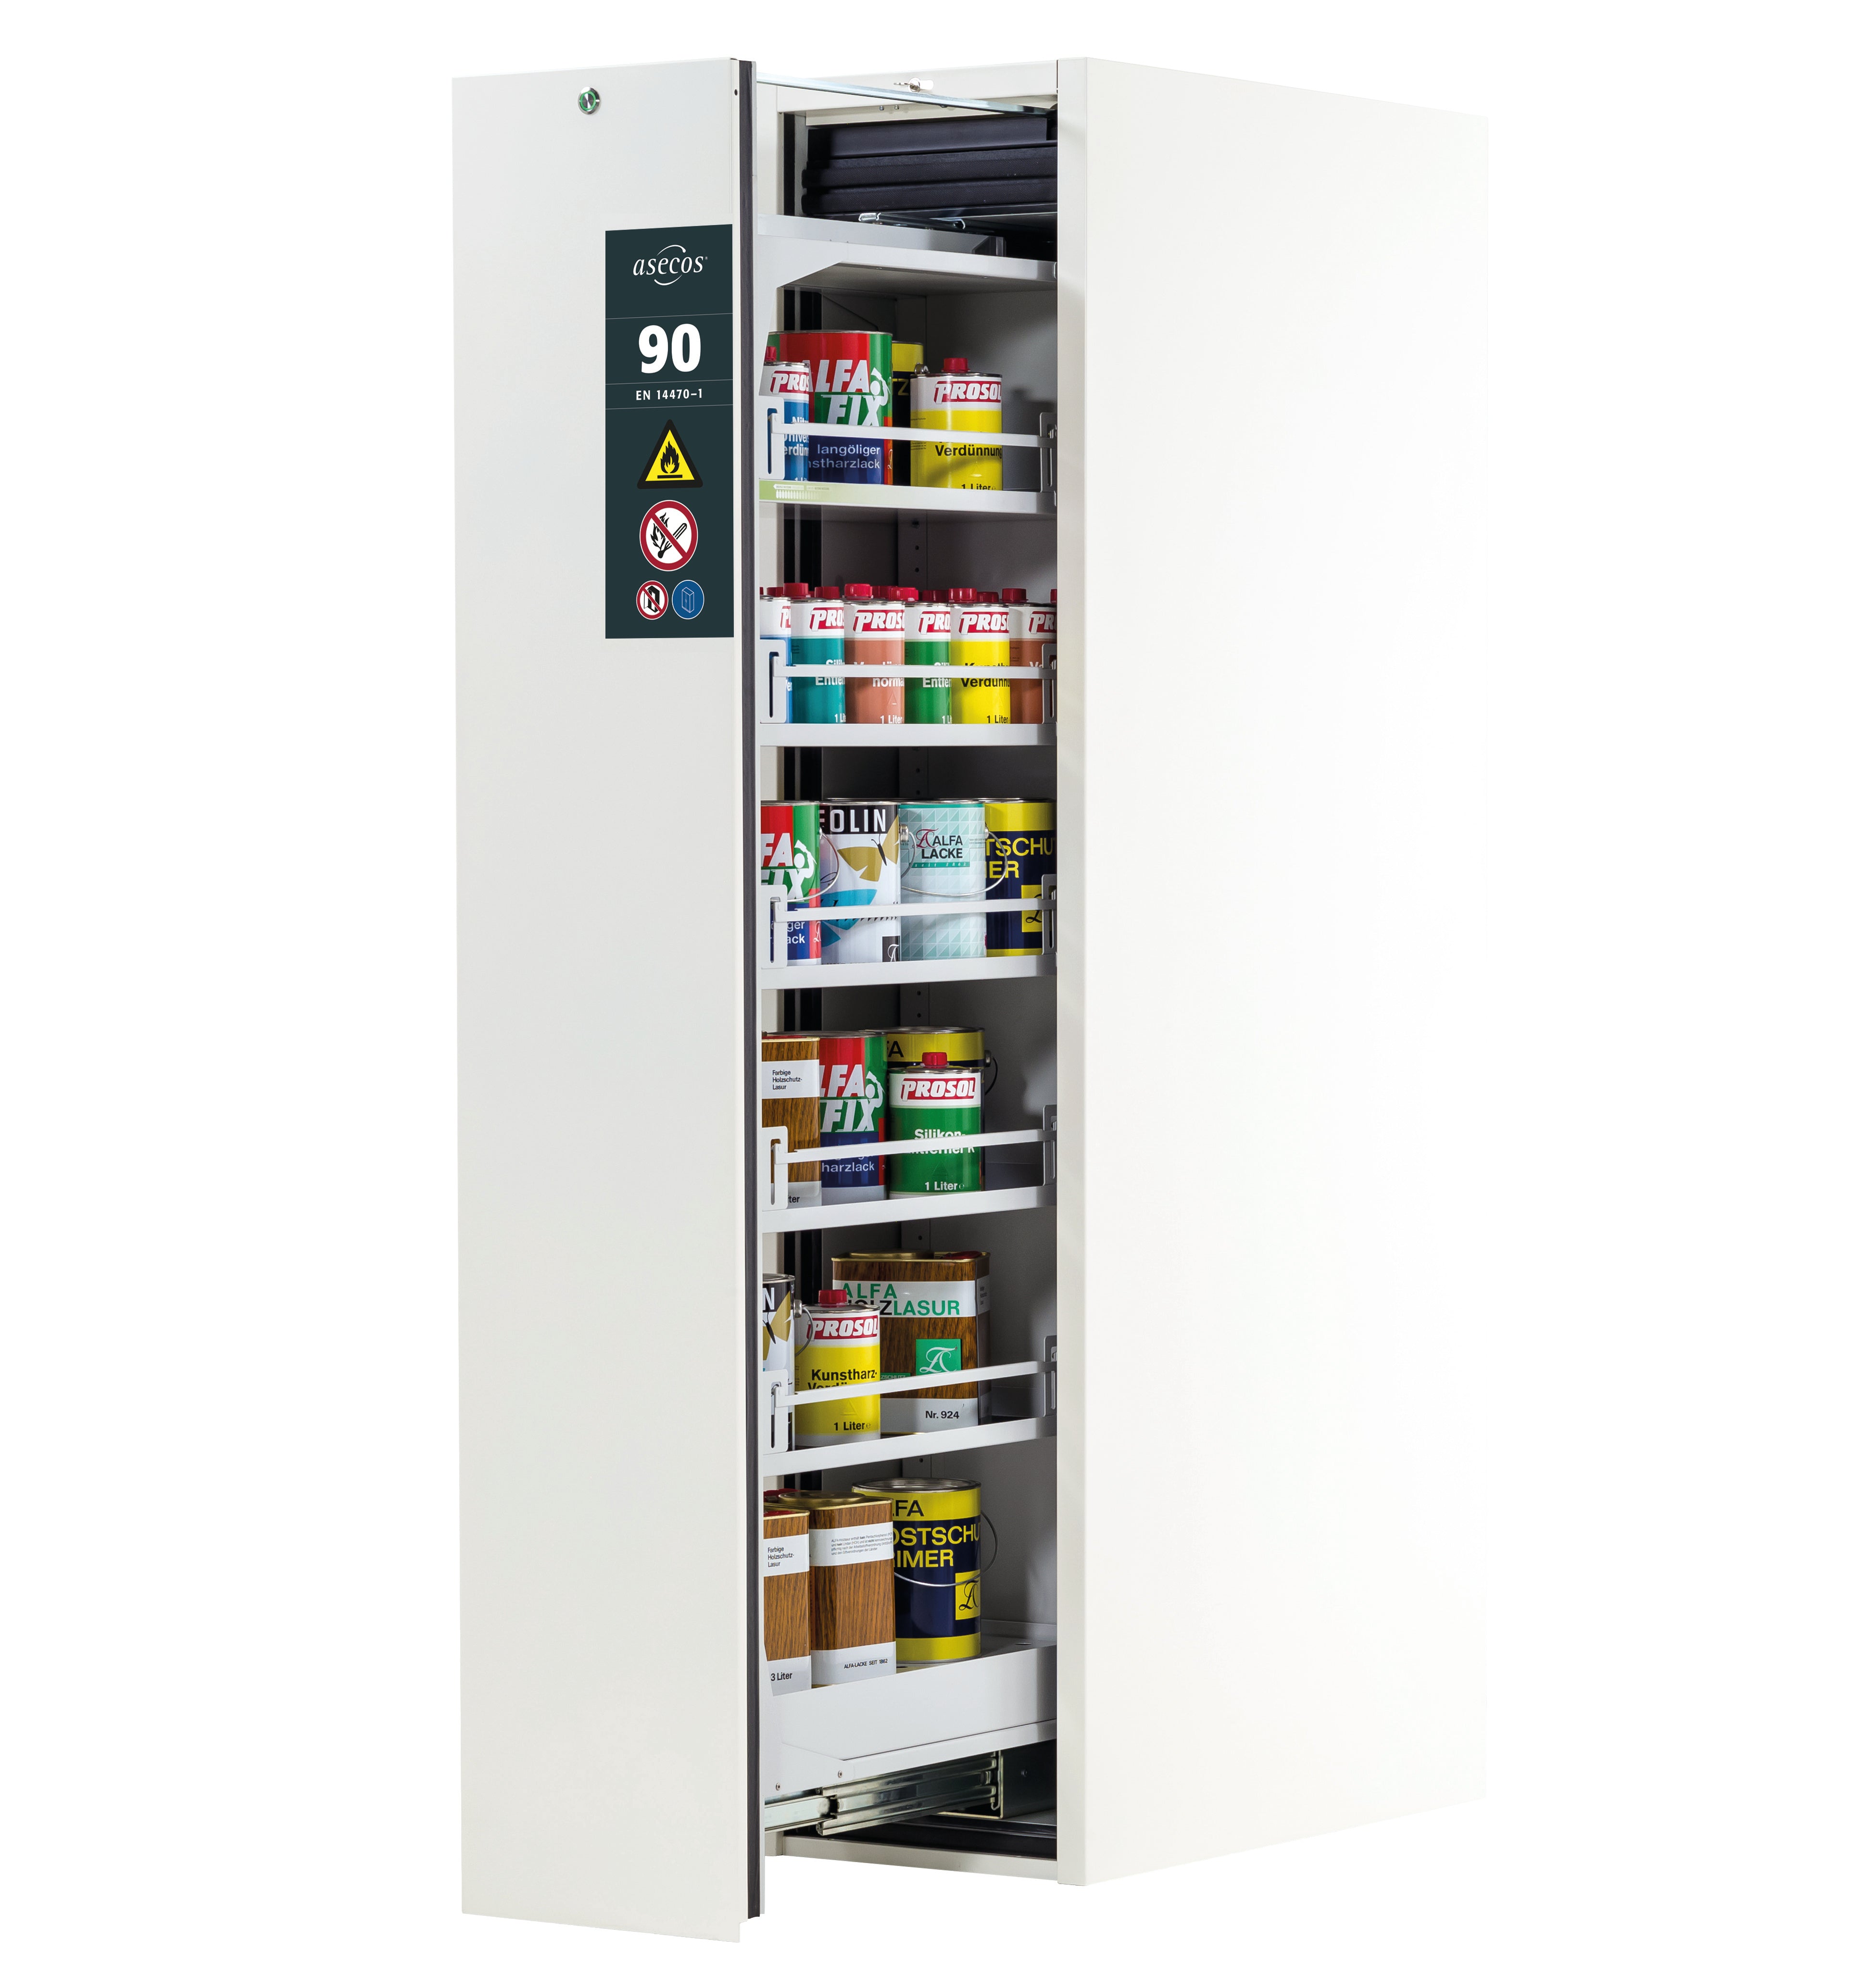 Type 90 safety cabinet V-MOVE-90 model V90.196.045.VDAC:0012 in laboratory white (similar to RAL 9016) with 5x standard shelves (sheet steel)